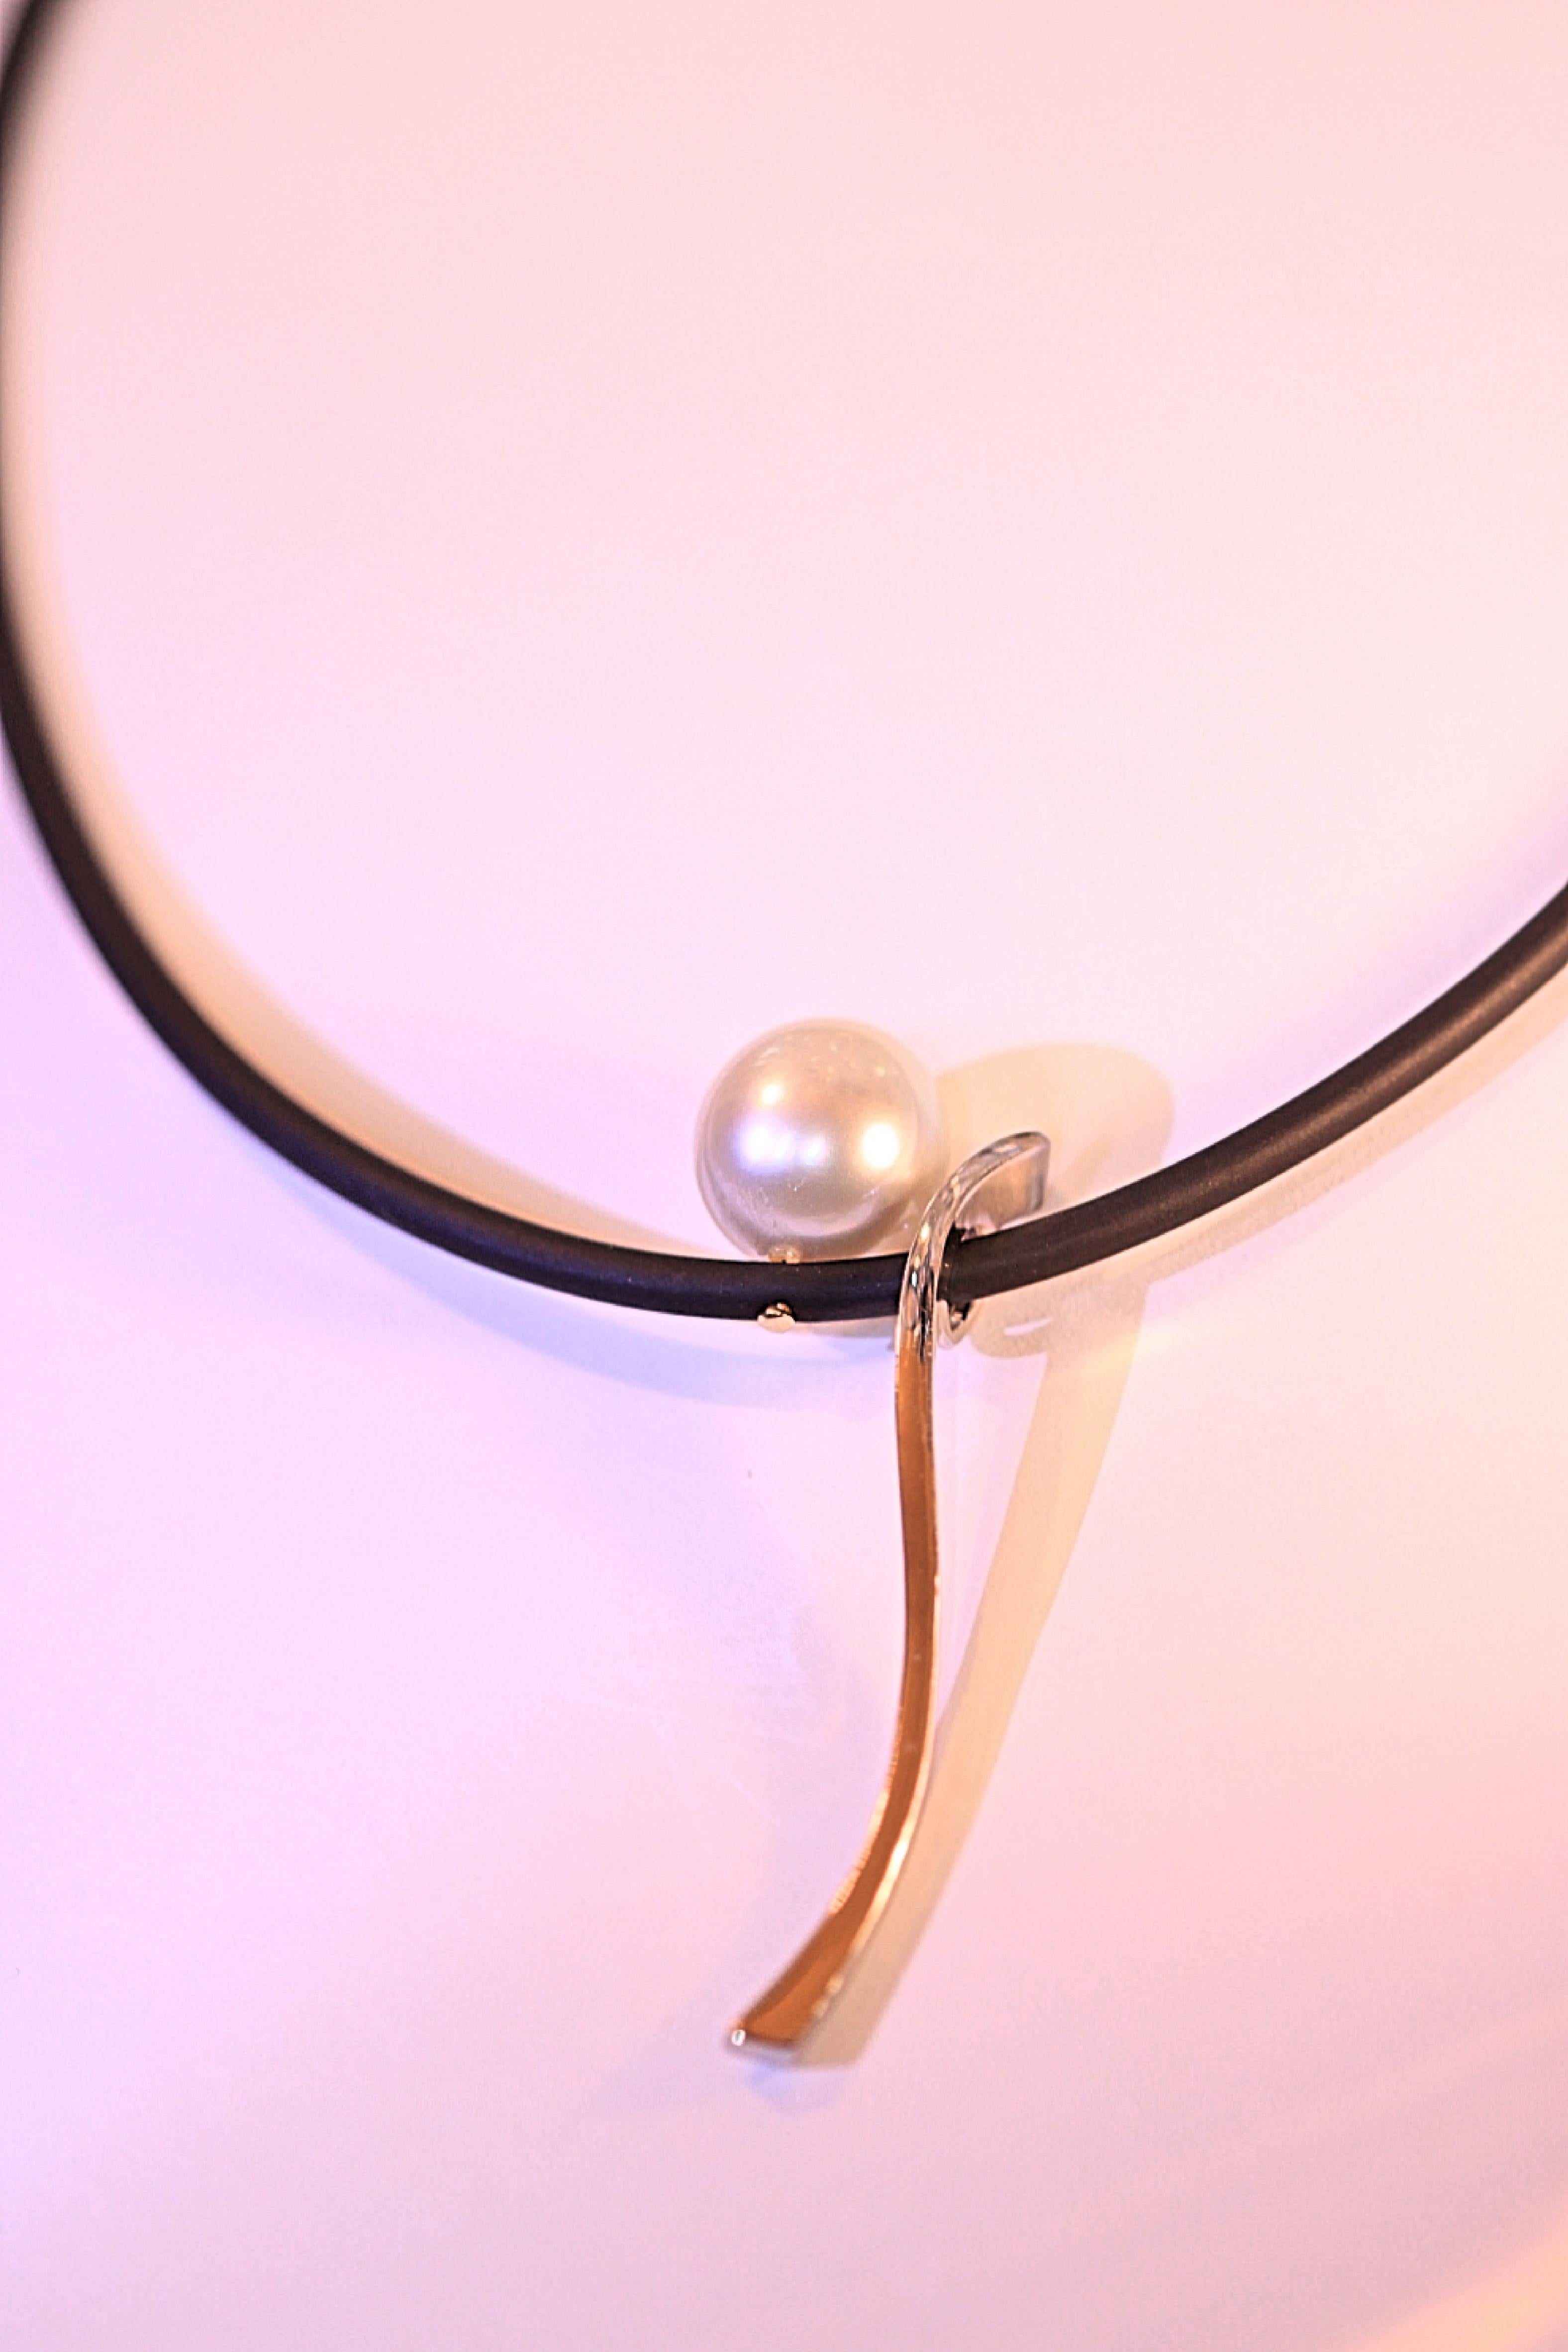 A  classy pearl, white gold and black cord necklace.  The pearl is a 13 mm round, beautiful pearl that has excellent luster and minor blemishes.  The pearl is attached to a black cord and the cord has a 14 karat white gold dangle next to the pearl. 